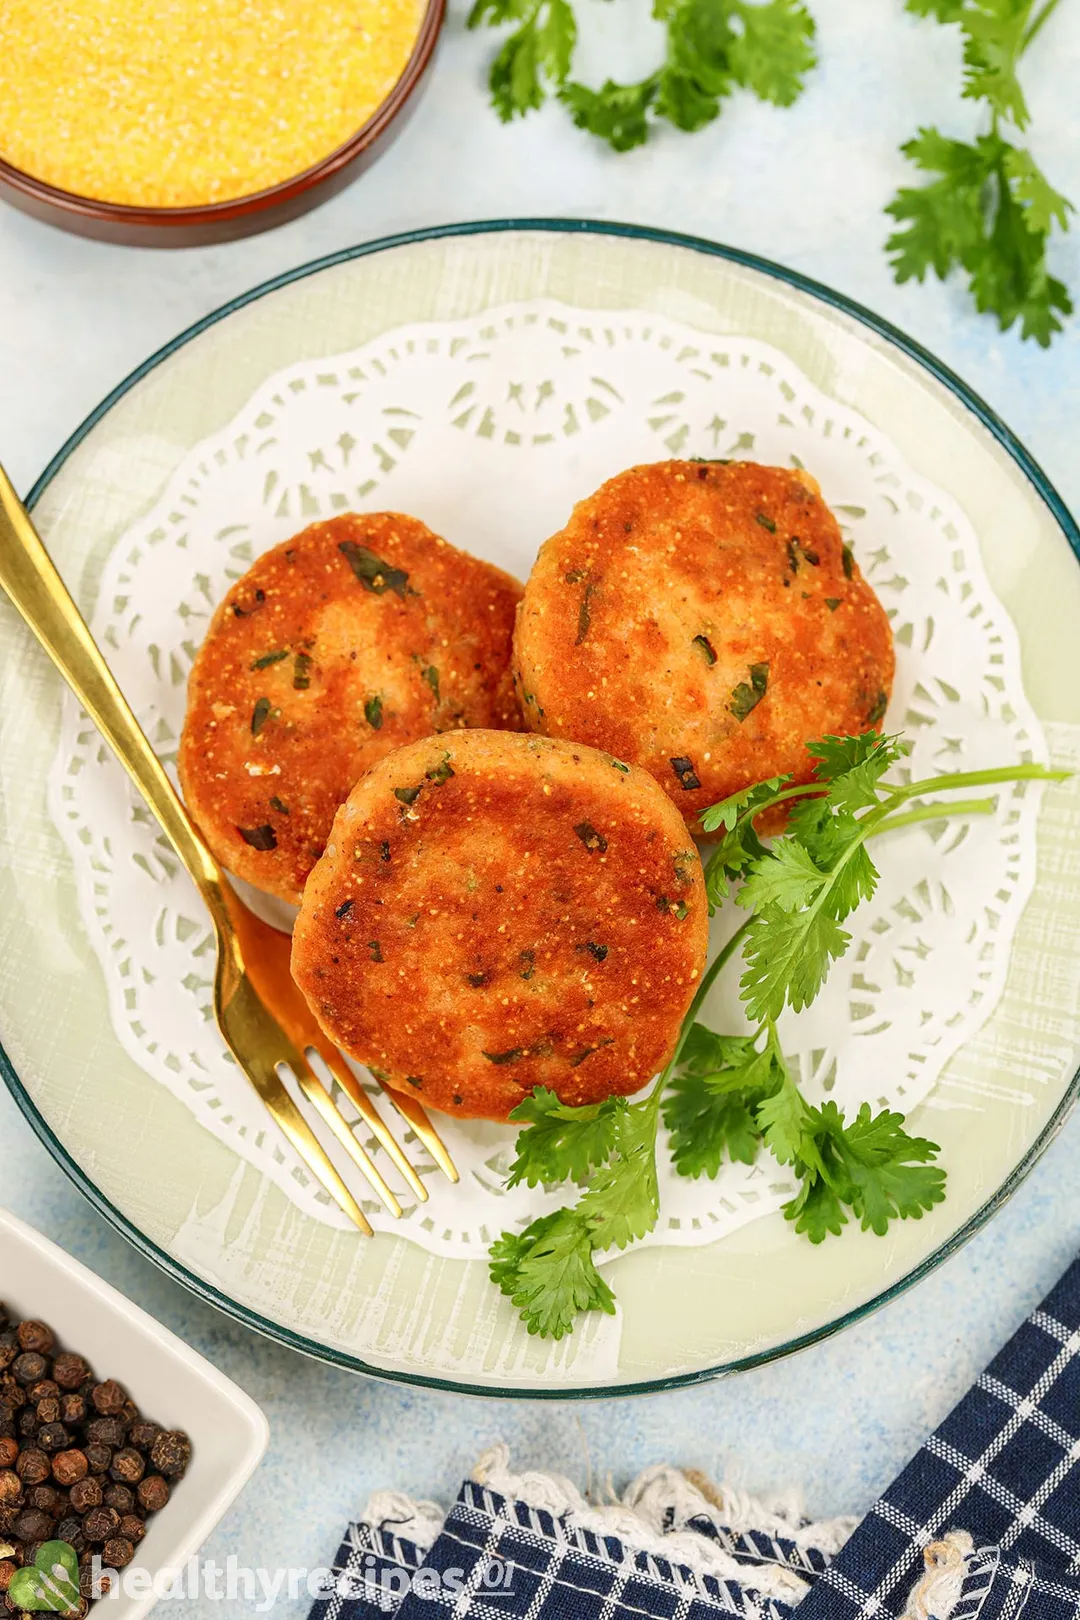 three salmon patties on a plate garnished with a fork and a bowl of cornmeal